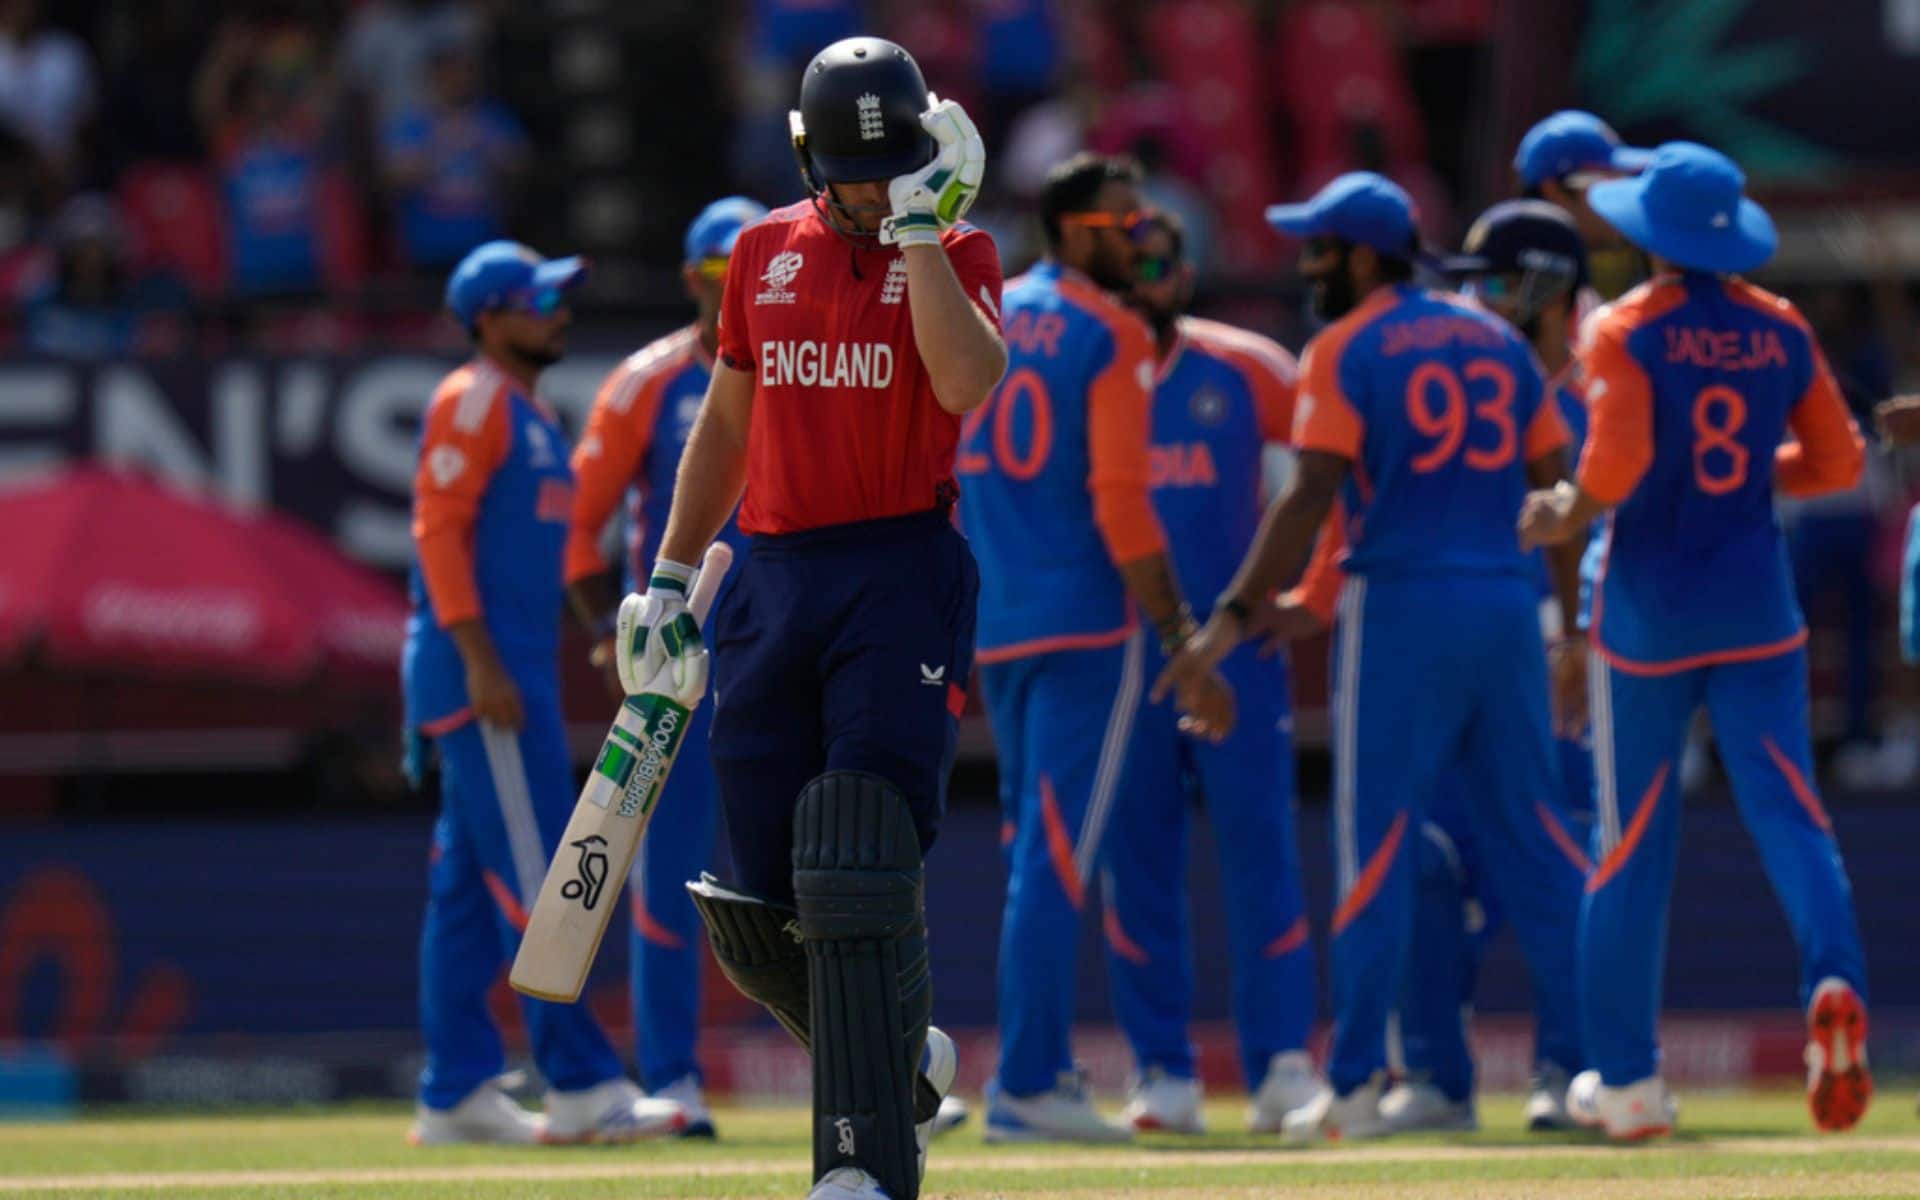 ‘India Outplayed Us…’: Jos Buttler After England’s T20 WC Semifinal Defeat To Rohit Sharma & Co